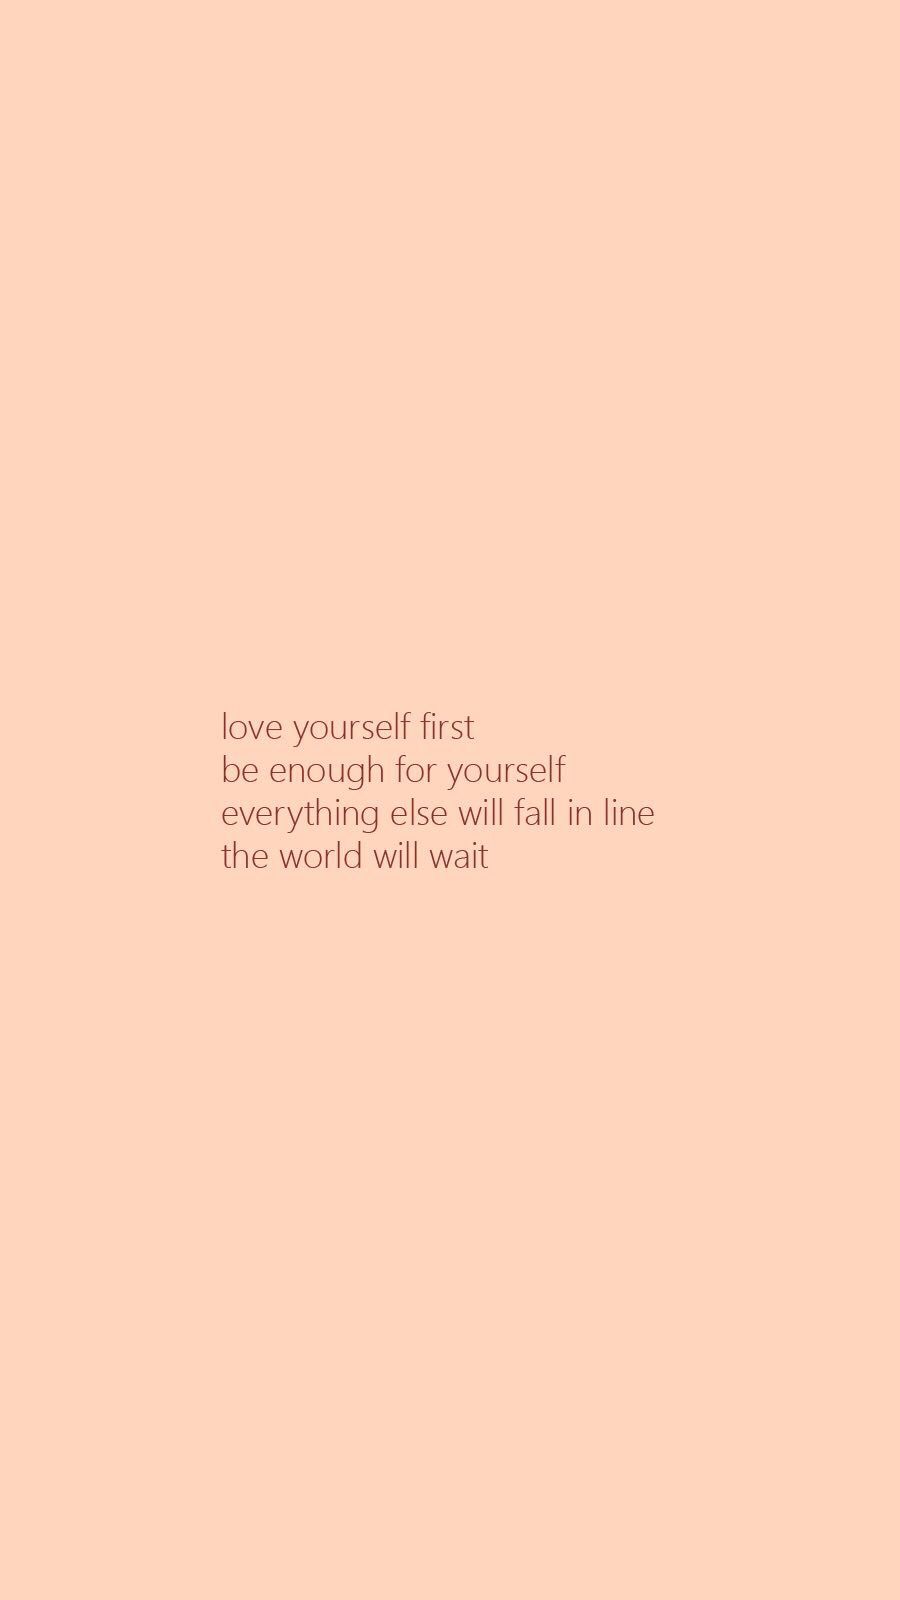 Self love first wallpaper. Love yourself first quotes, Self love quotes, Love you more quotes